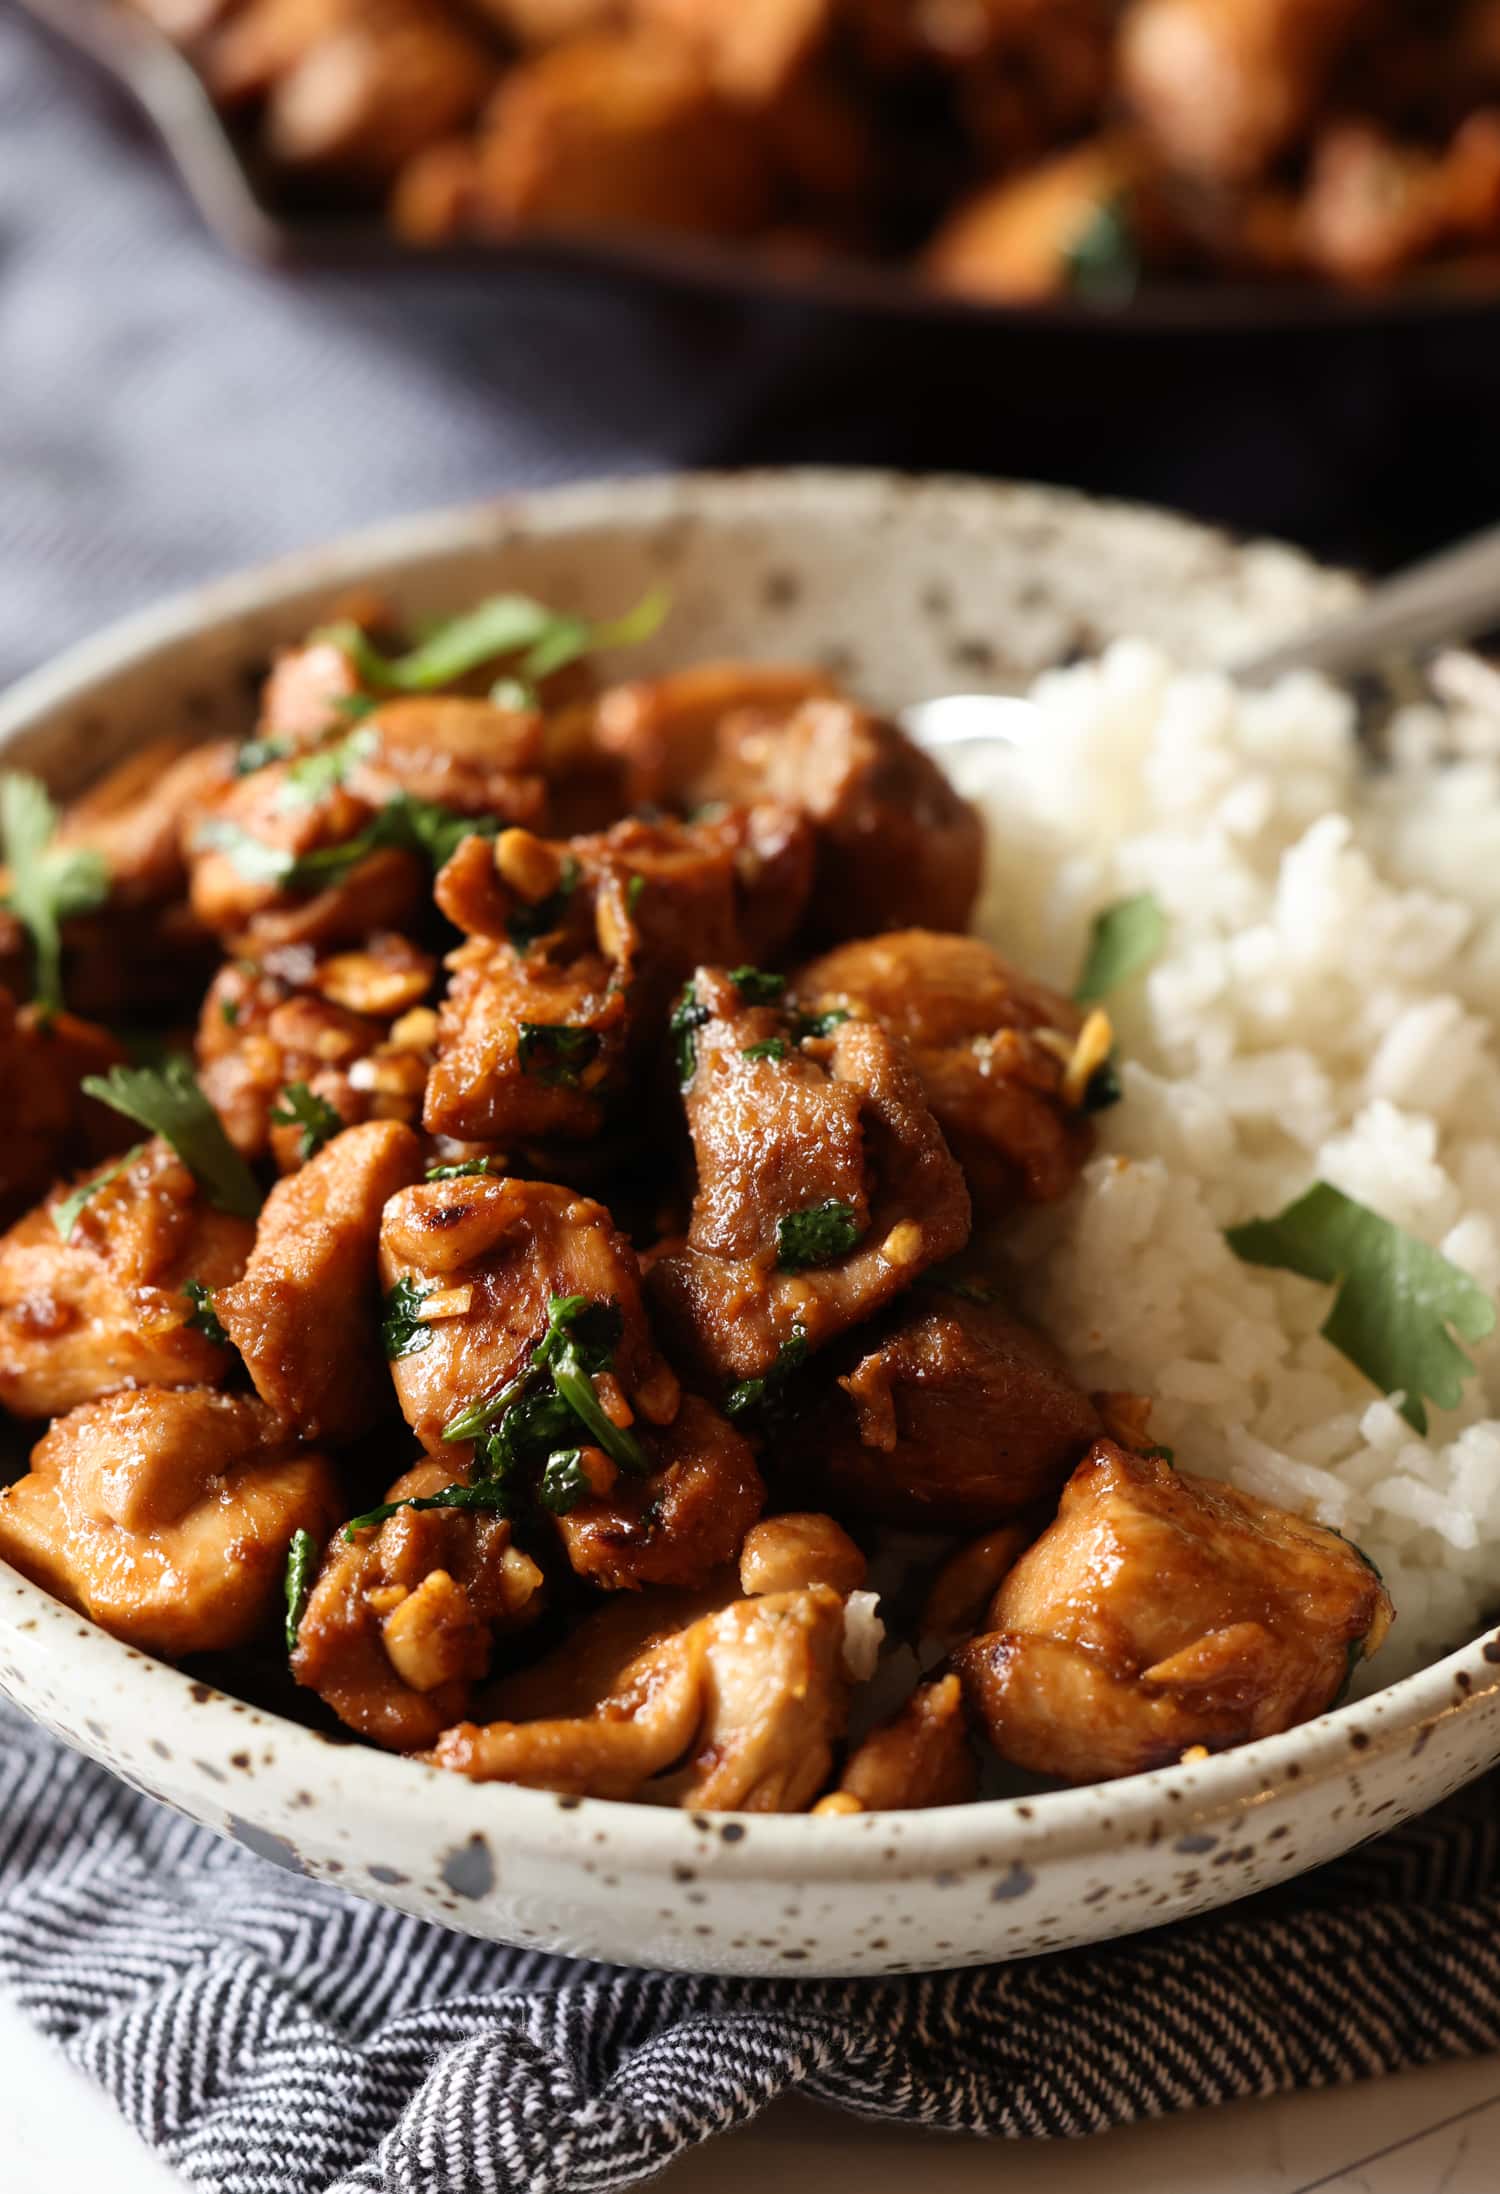 Ginger chicken served in a bowl over rice, garnished with chopped fresh coriander.